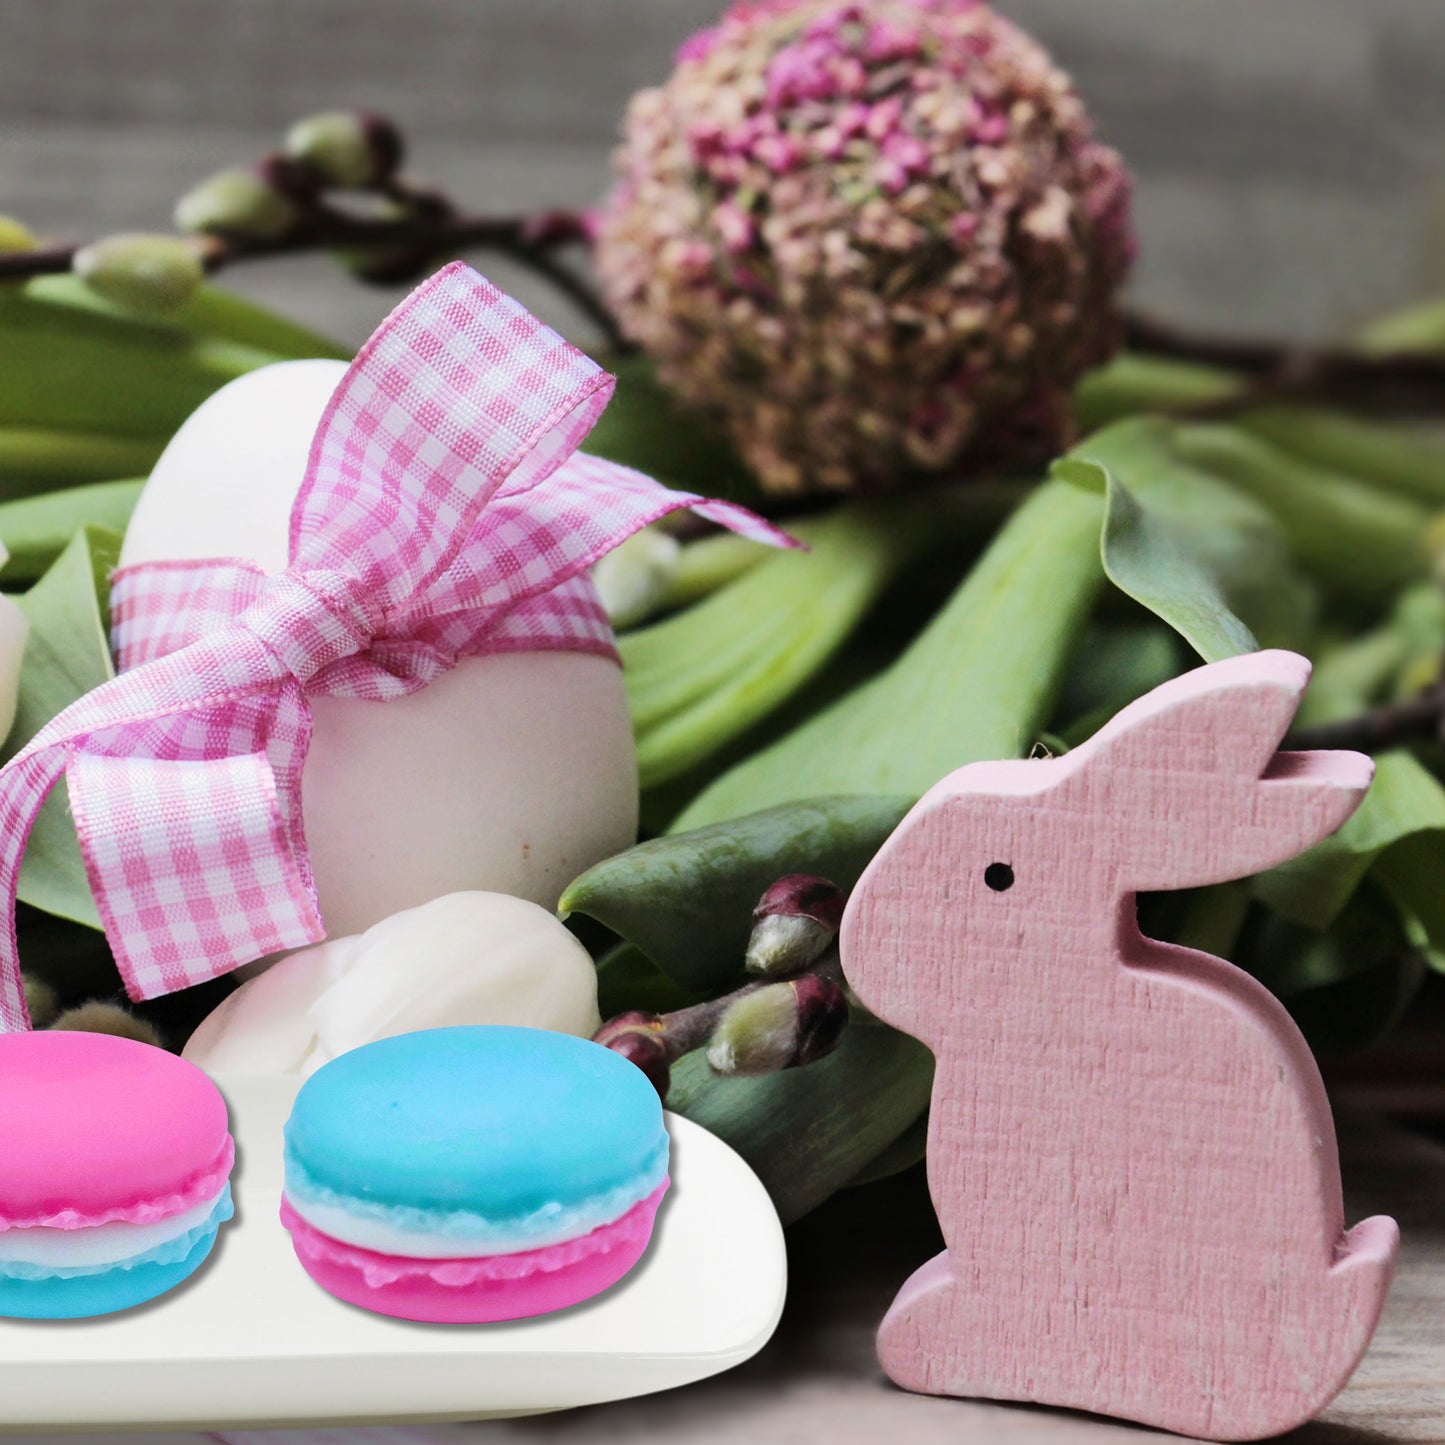 Easter Delights Peeps Macaron Scented Soy Wax Melts